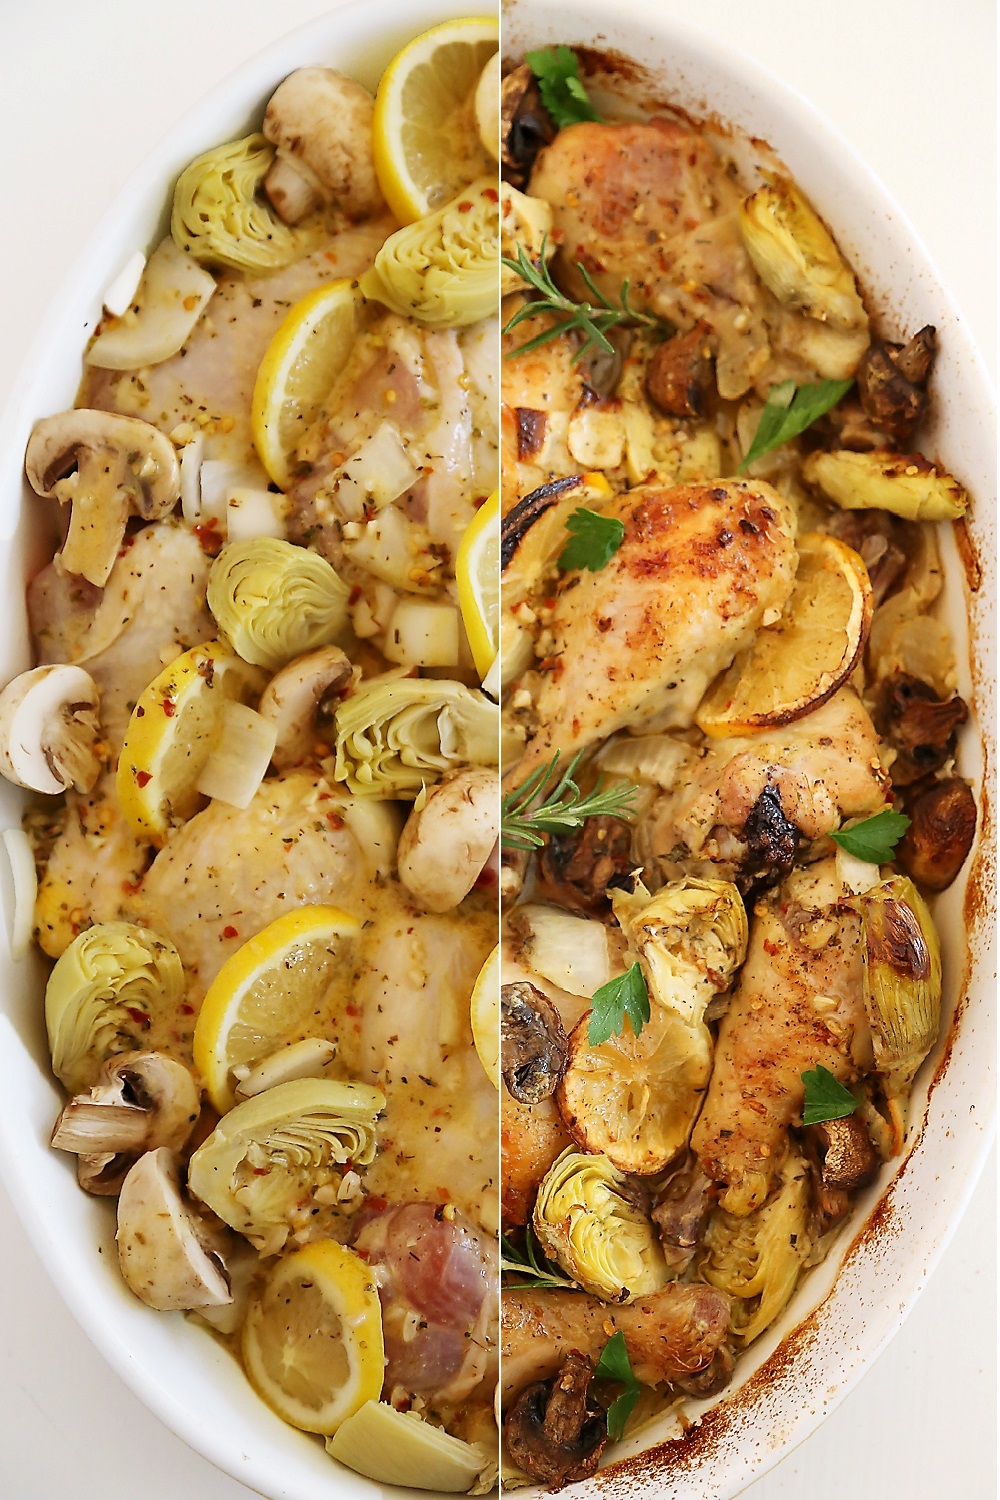 Lemon and Artichoke Oven Roasted Chicken - Crispy, tender lemon-roasted chicken with artichokes and mushrooms makes an easy, elegant dinner! Thecomfortofcooking.com